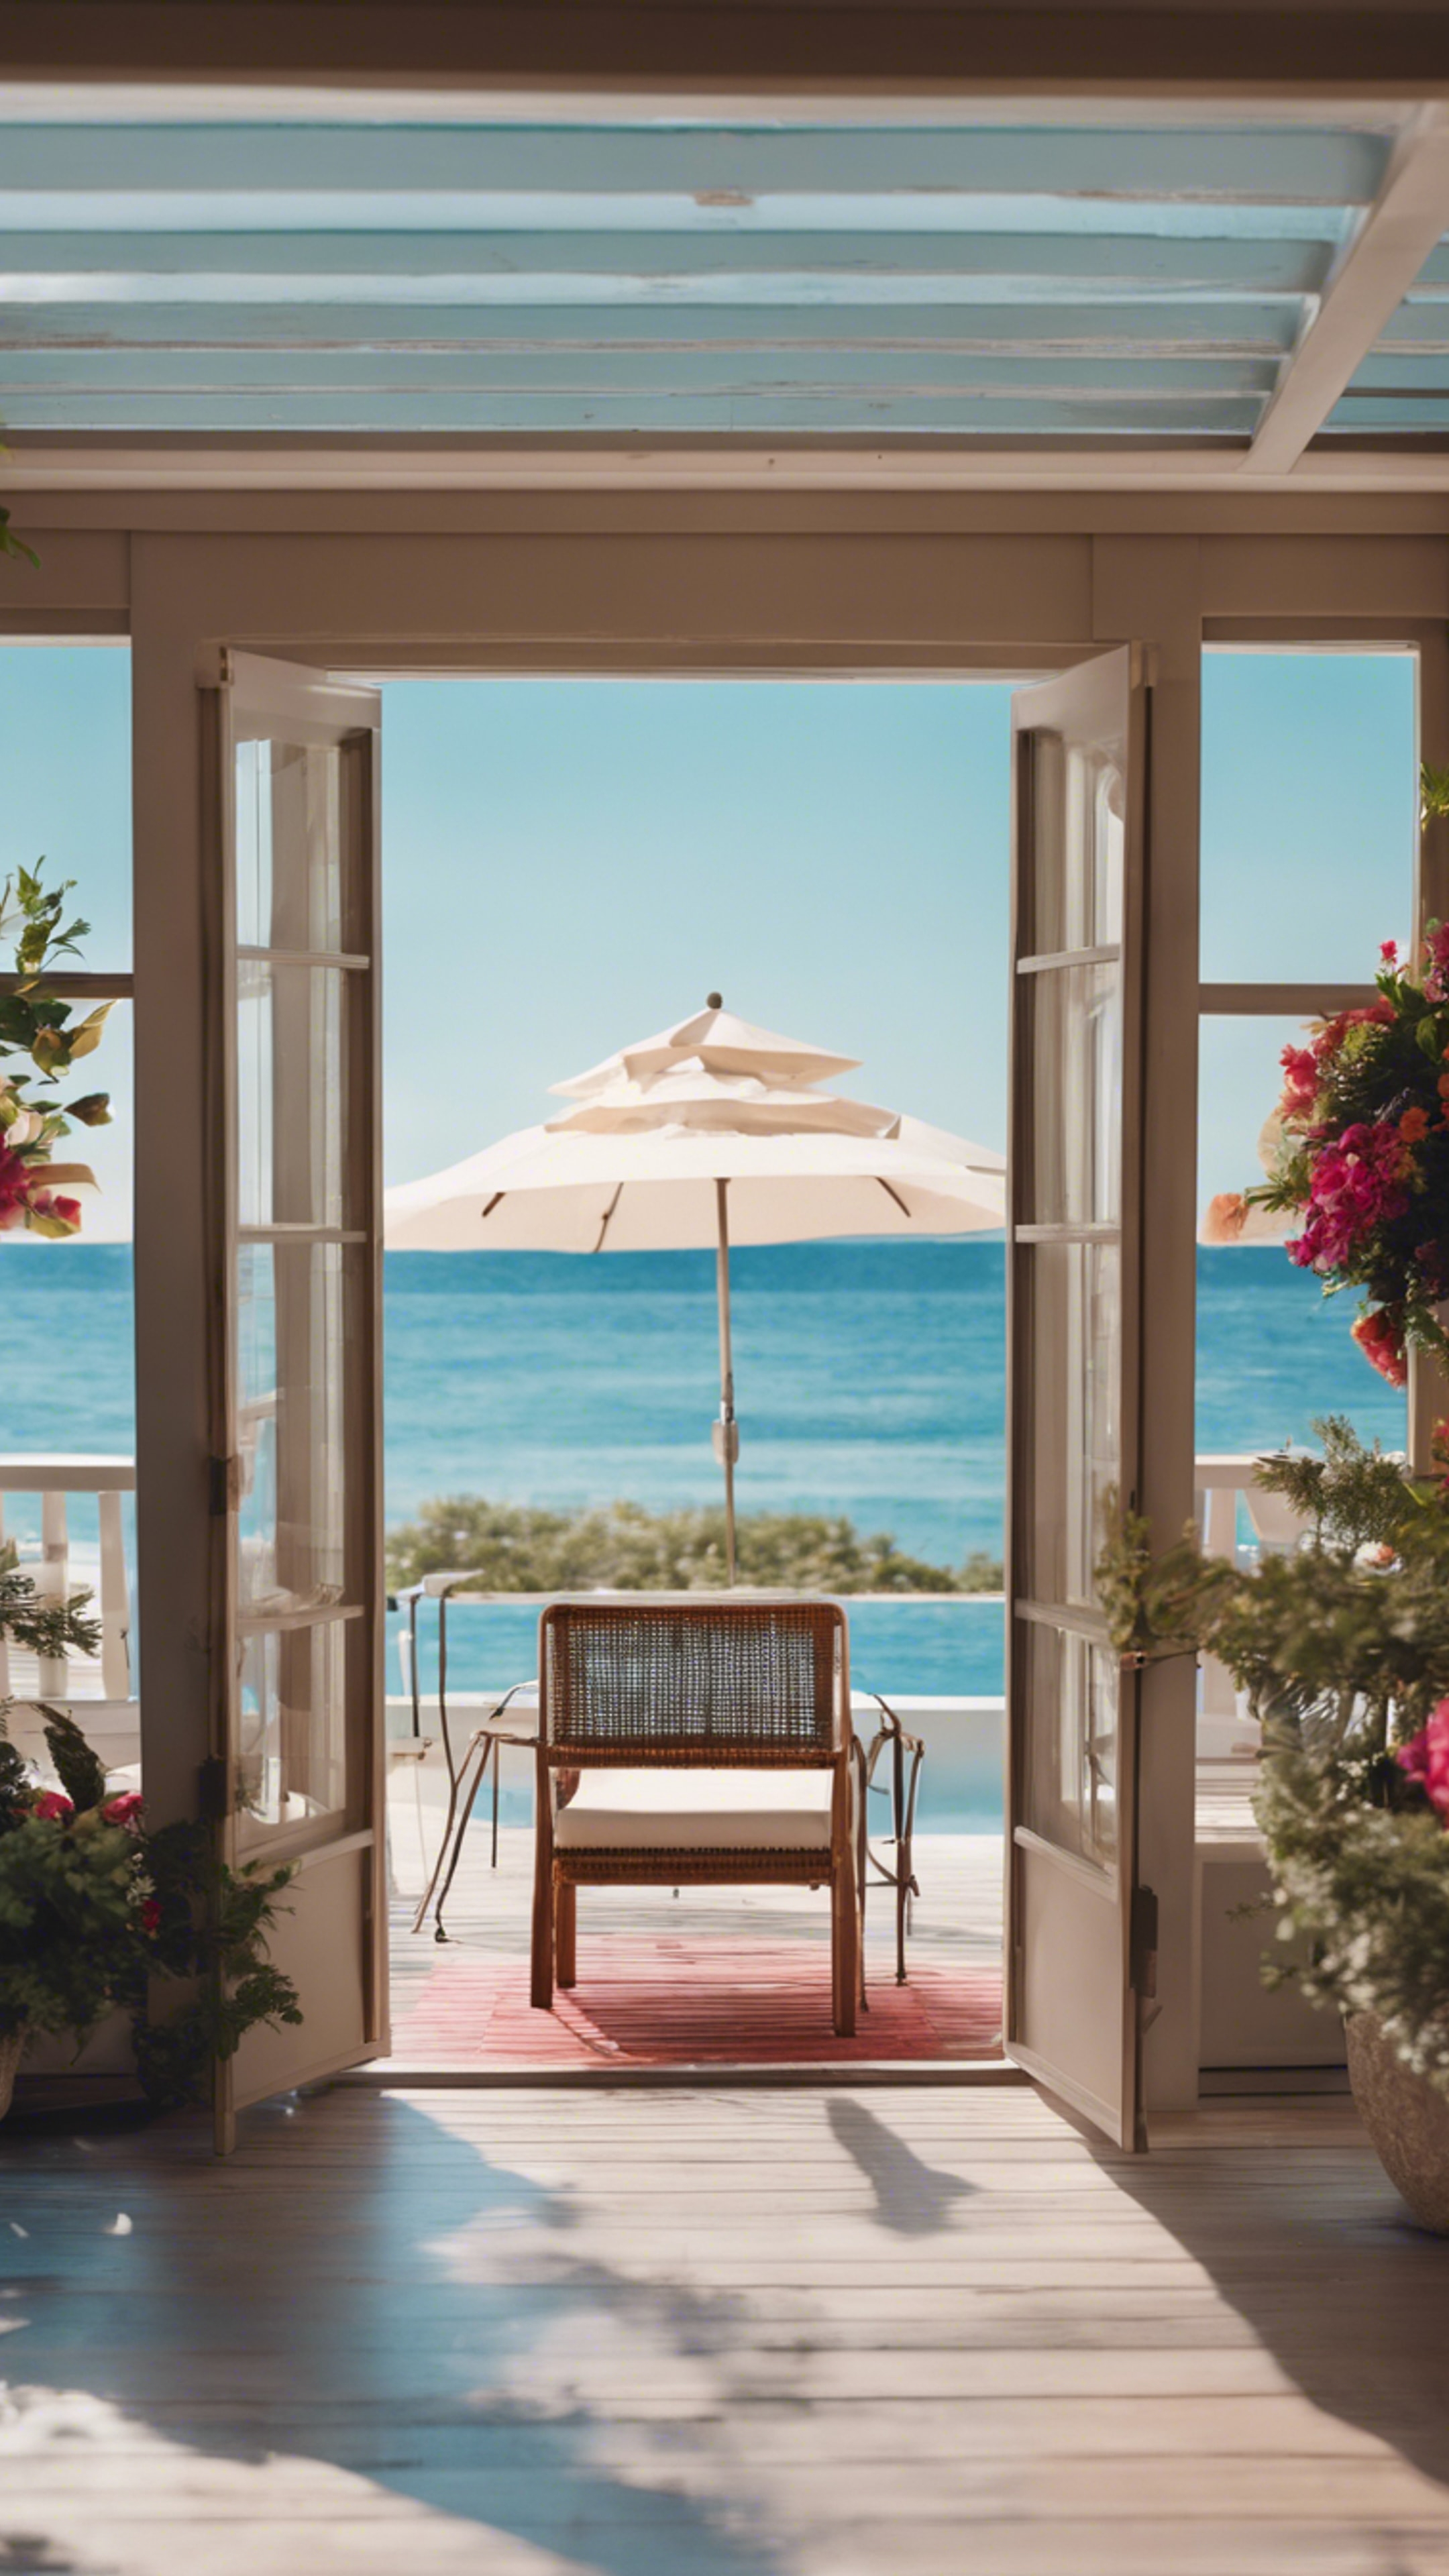 Scene of a waterfront property decorated in preppy style, with a patio looking out to a calm blue sea. Wallpaper[612b9da4582c4c62a239]